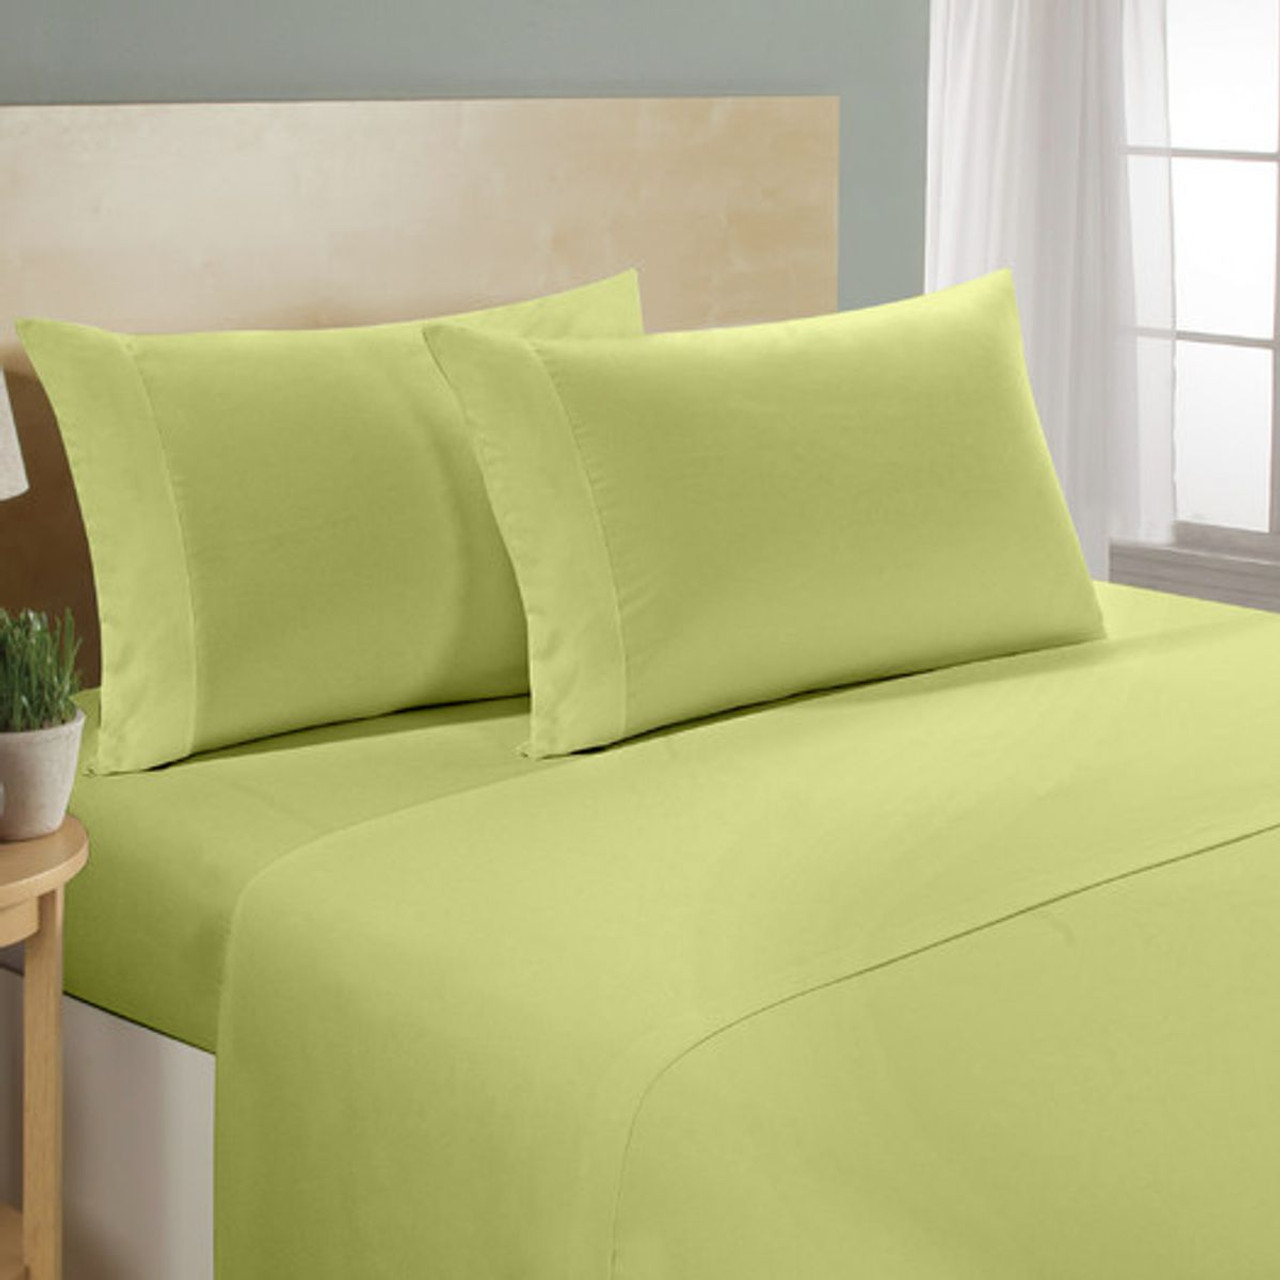 1,000-Thread-Count 100% Egyptian Cotton 4-Piece Sheet Set product image